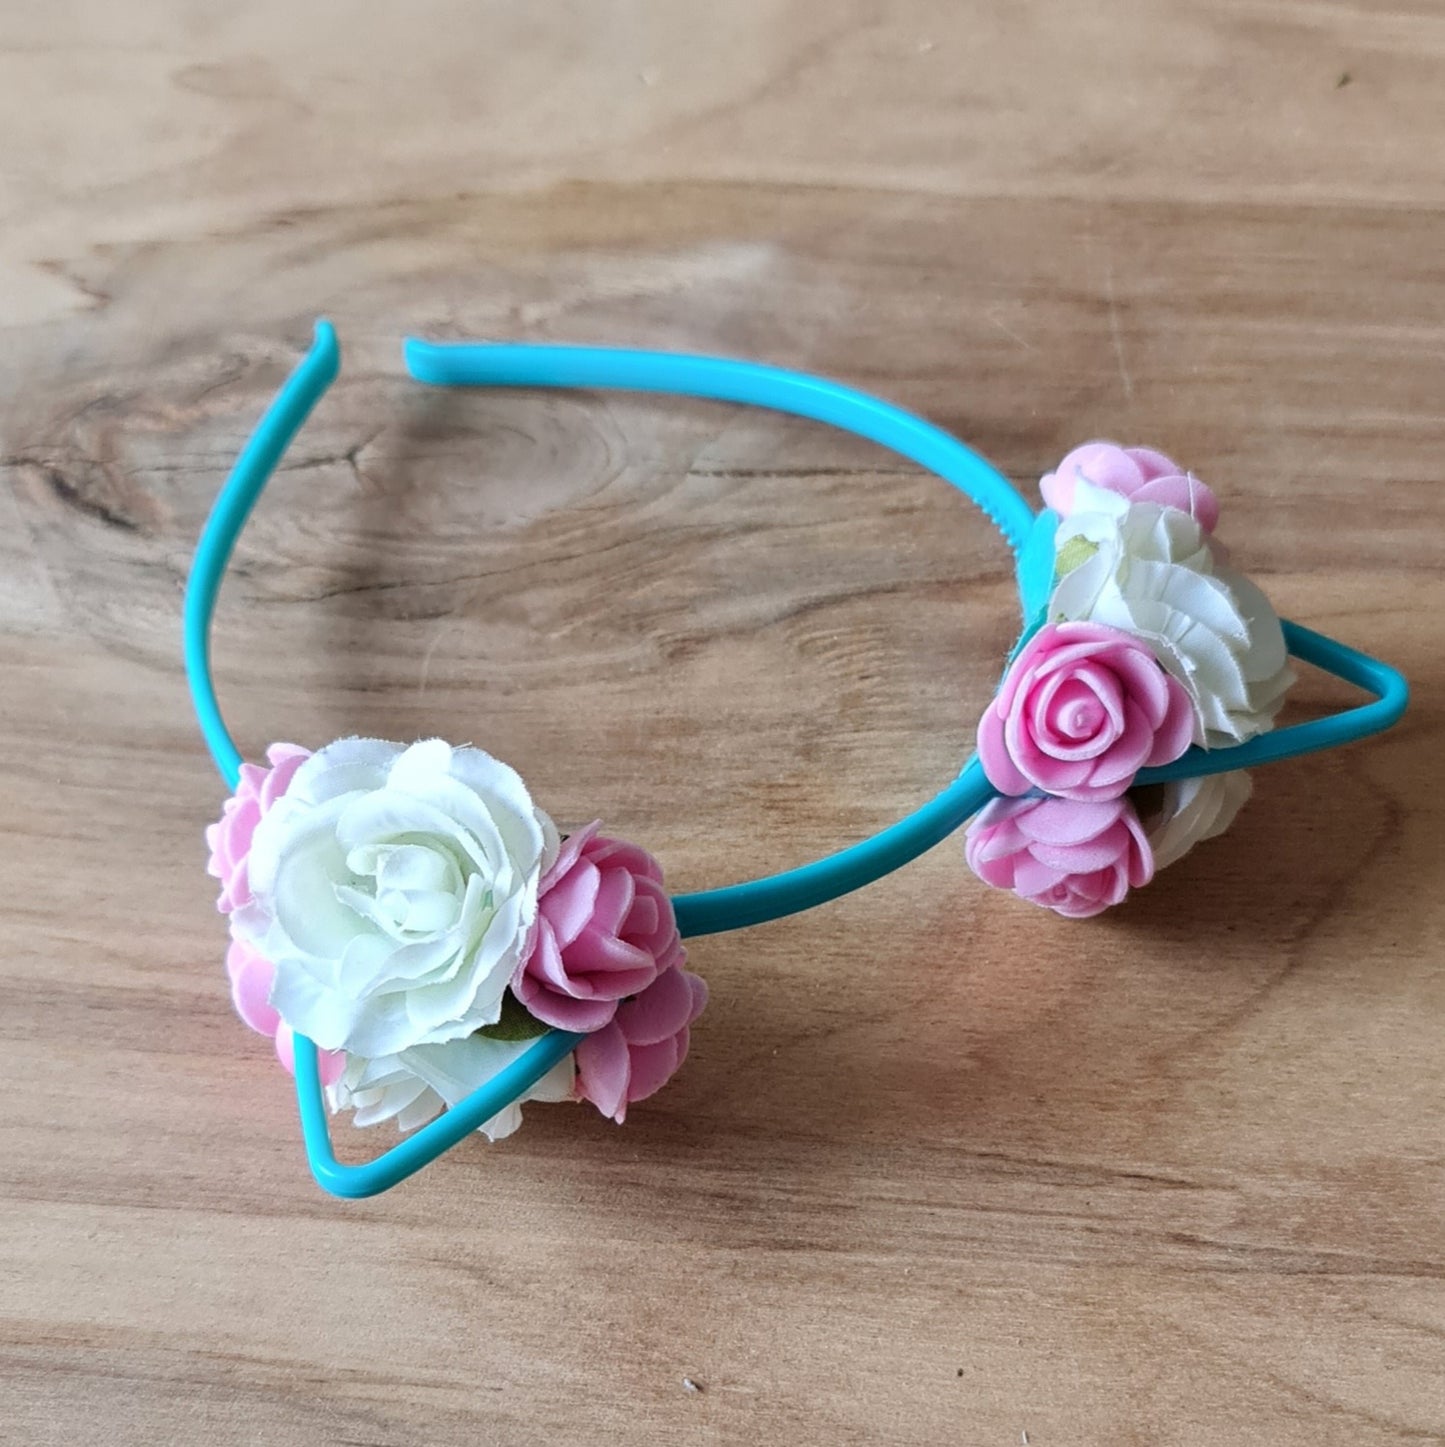 Blue-green hair band for girls with "cat ears" decorated with white and light pink flowers (APU2)